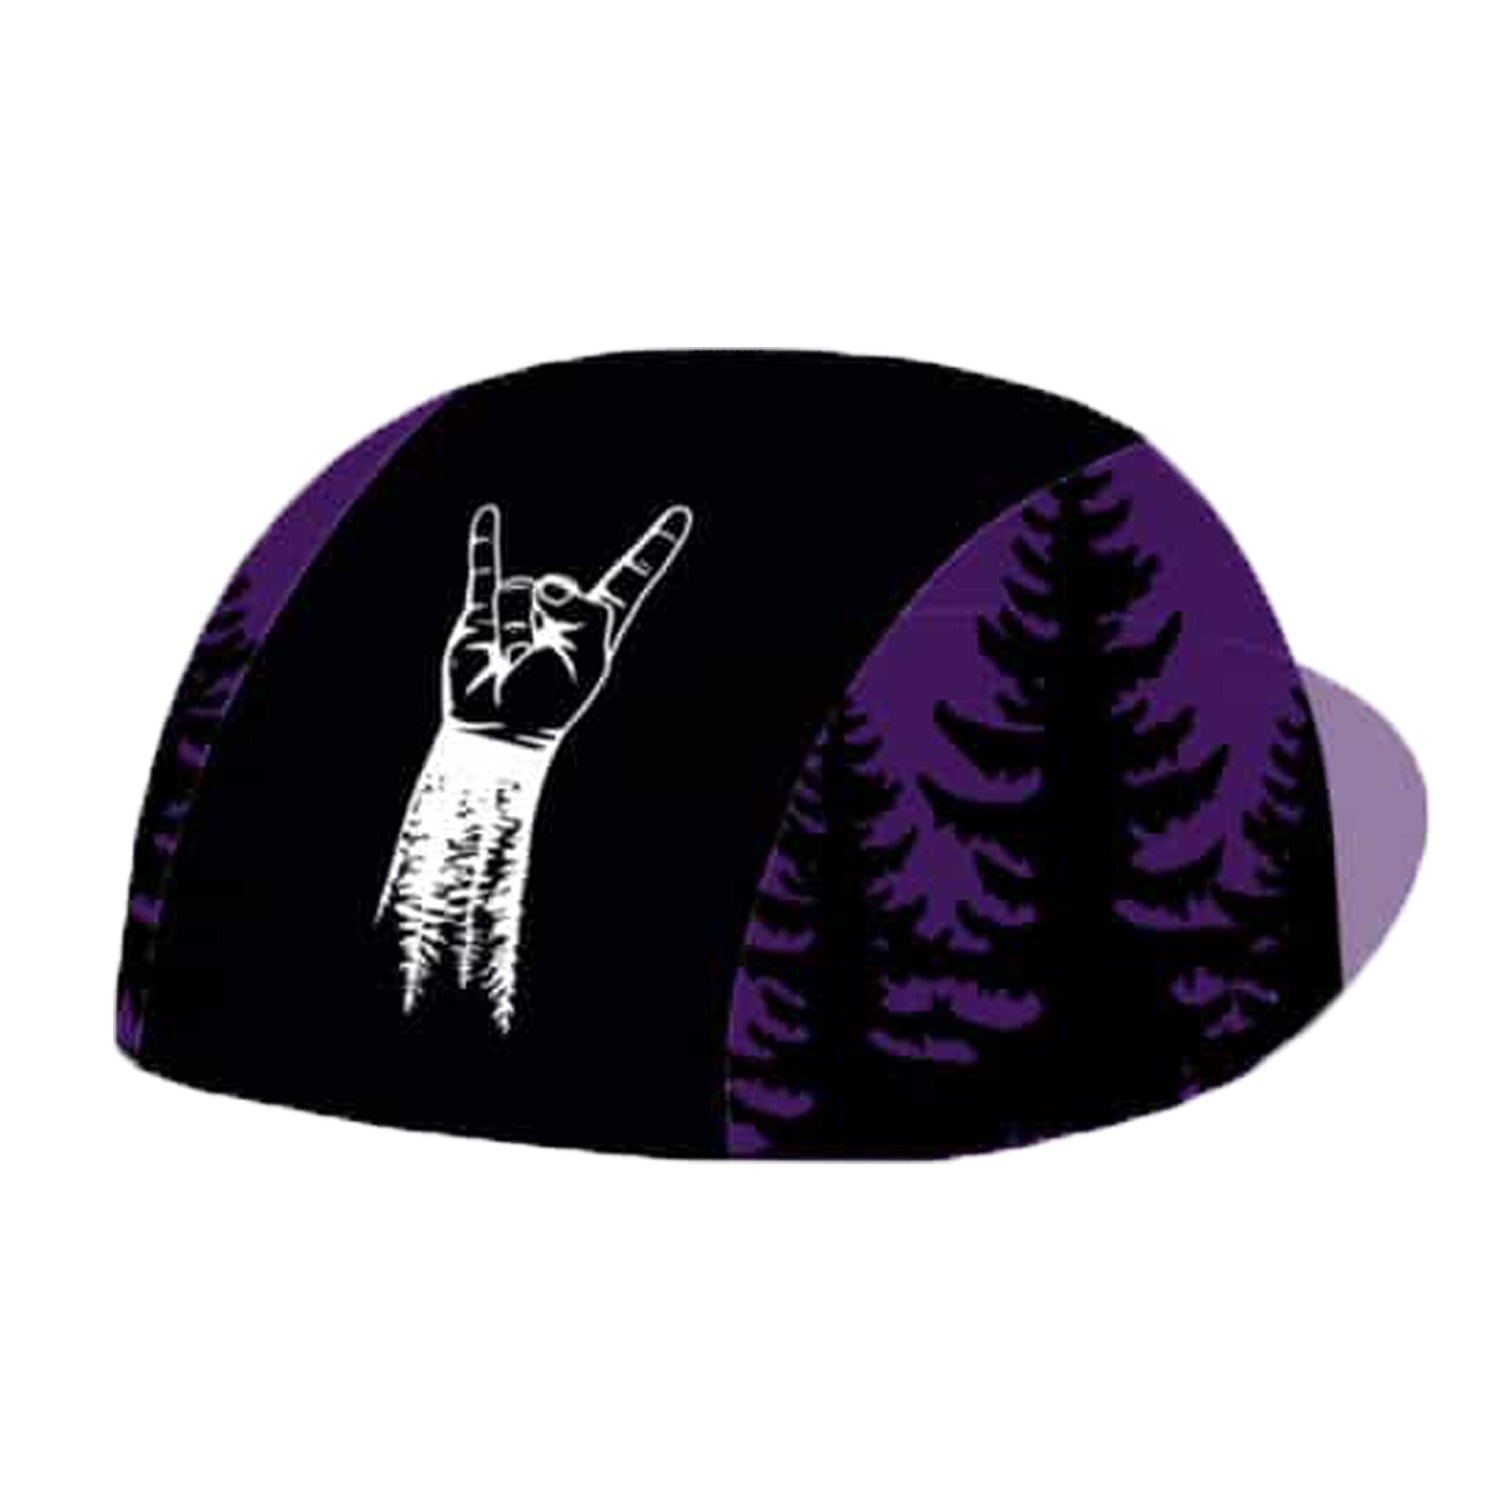 Classic Retro Forest Finger Printing Polyester Cycling Caps  Purple Black White Quick Dry For Bicycle Hats  Men And Women Wear